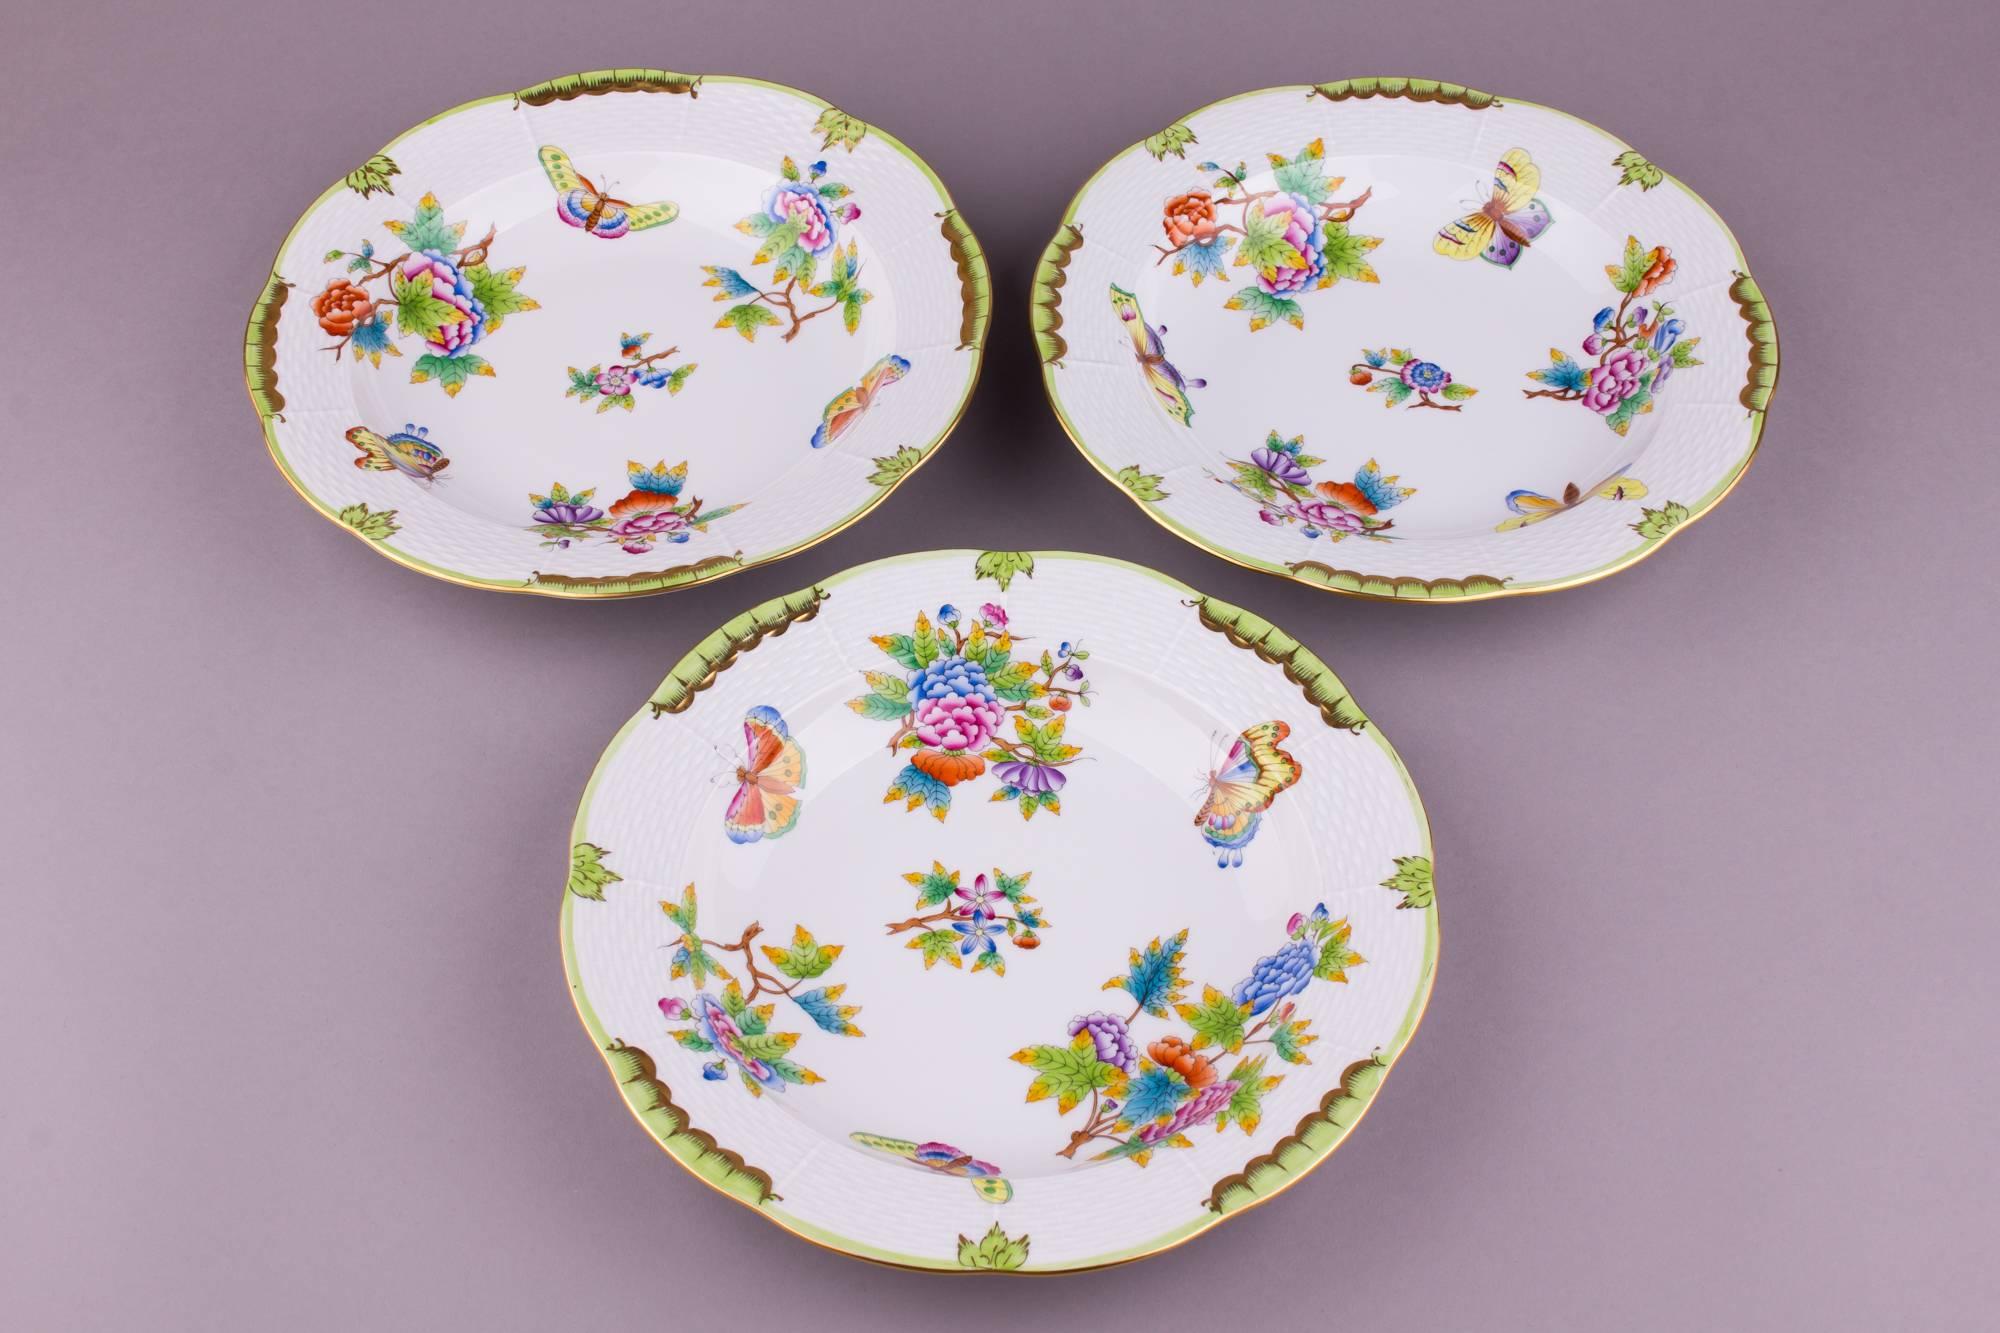 We ship this item worldwide for 110 USD with insurance. Shipping usually takes 3-7 business days. Express shipping with FedEx (2 days) available for 220 USD. 

Manufacturer: Herend Porcelain Manufactory (Hungary).
Quality: Hand-painted, 1st